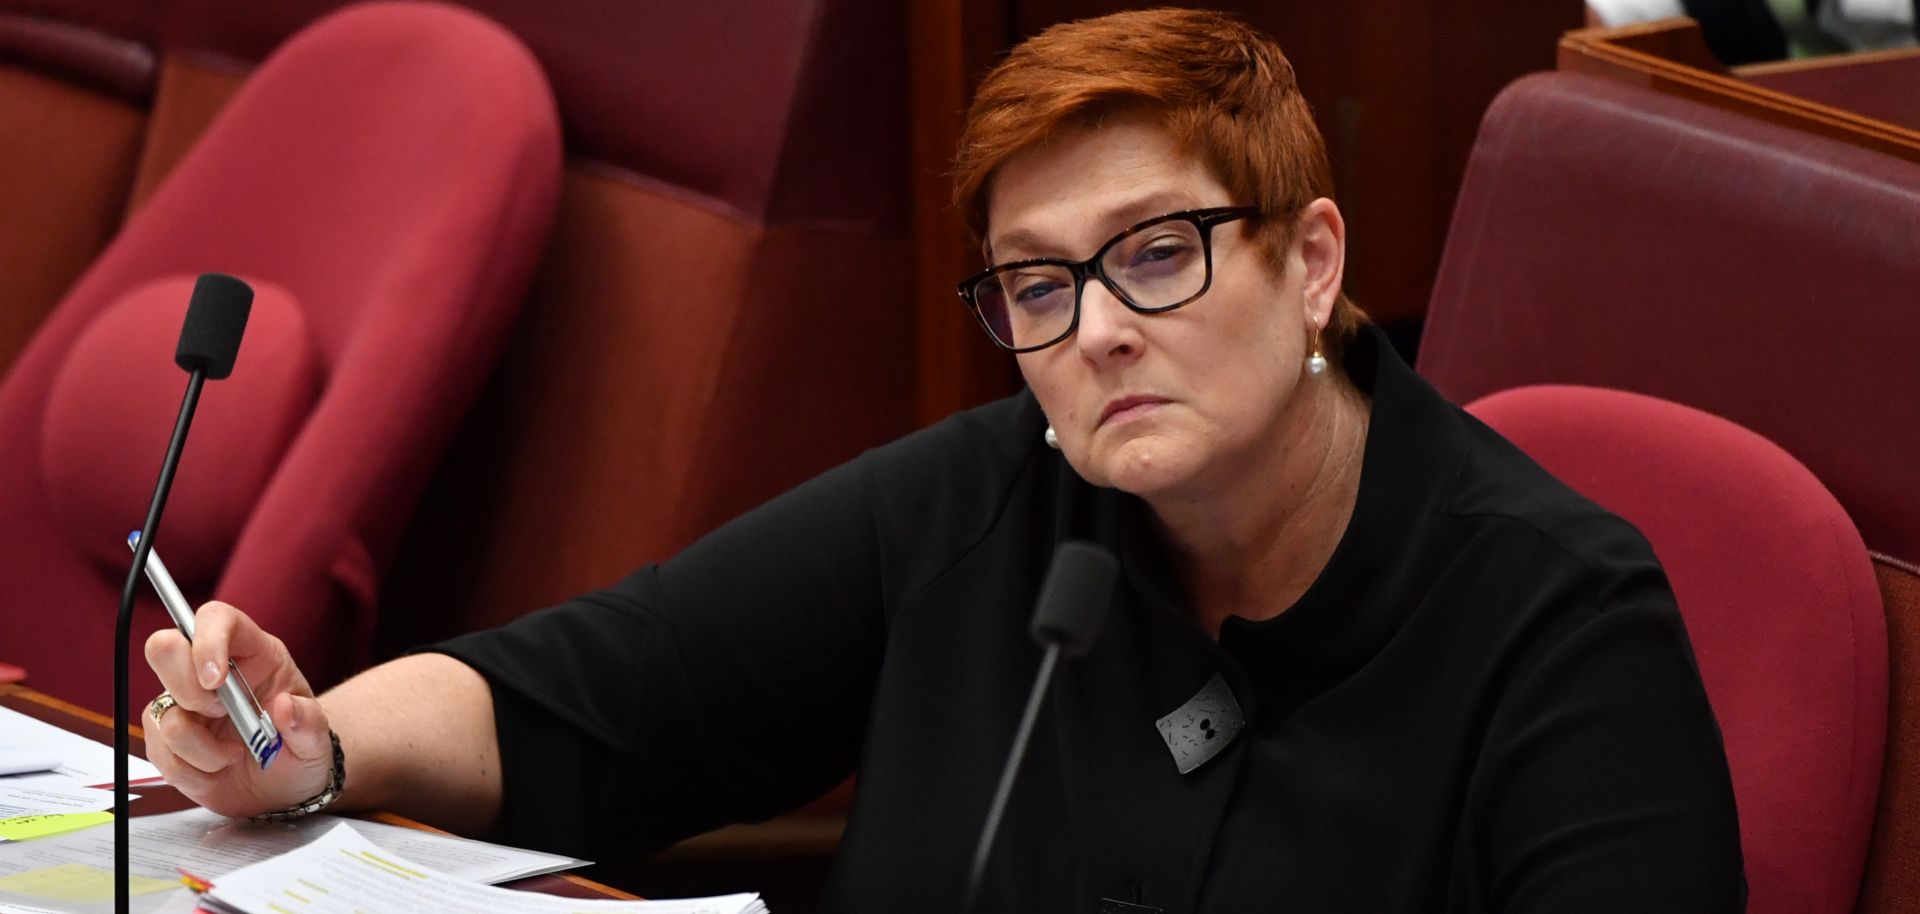 Australian Foreign Minister Marise Payne takes questions during a Senate hearing on Feb. 22, 2021.